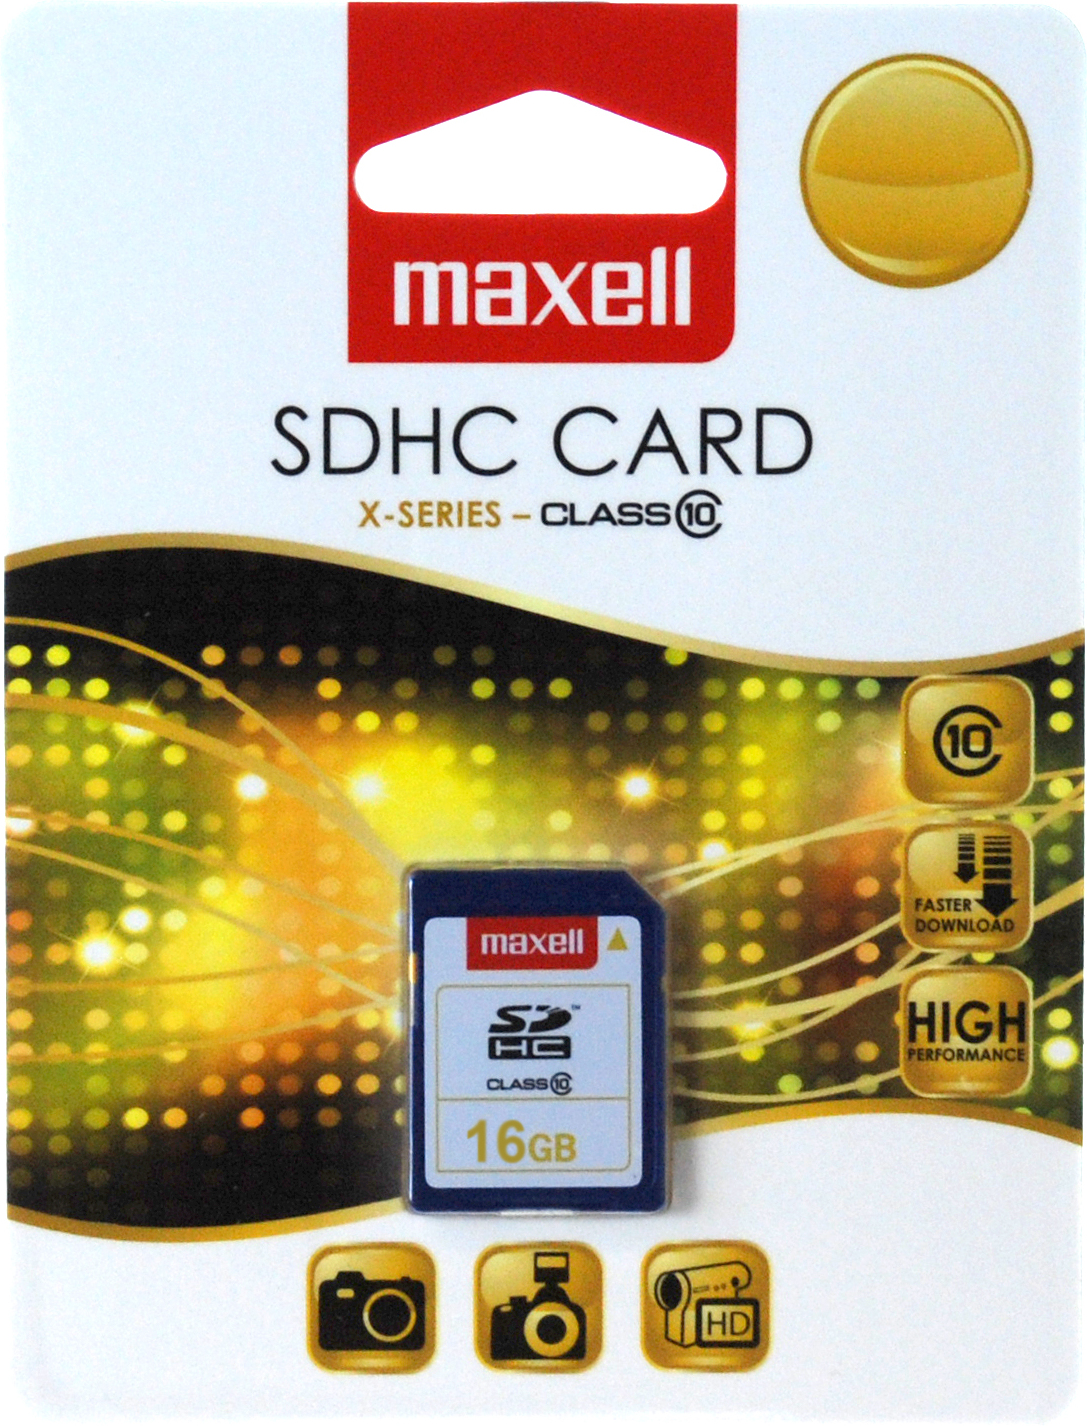 Maxell Sdhc 16gb Class 10 - Ordinateur - Main picture